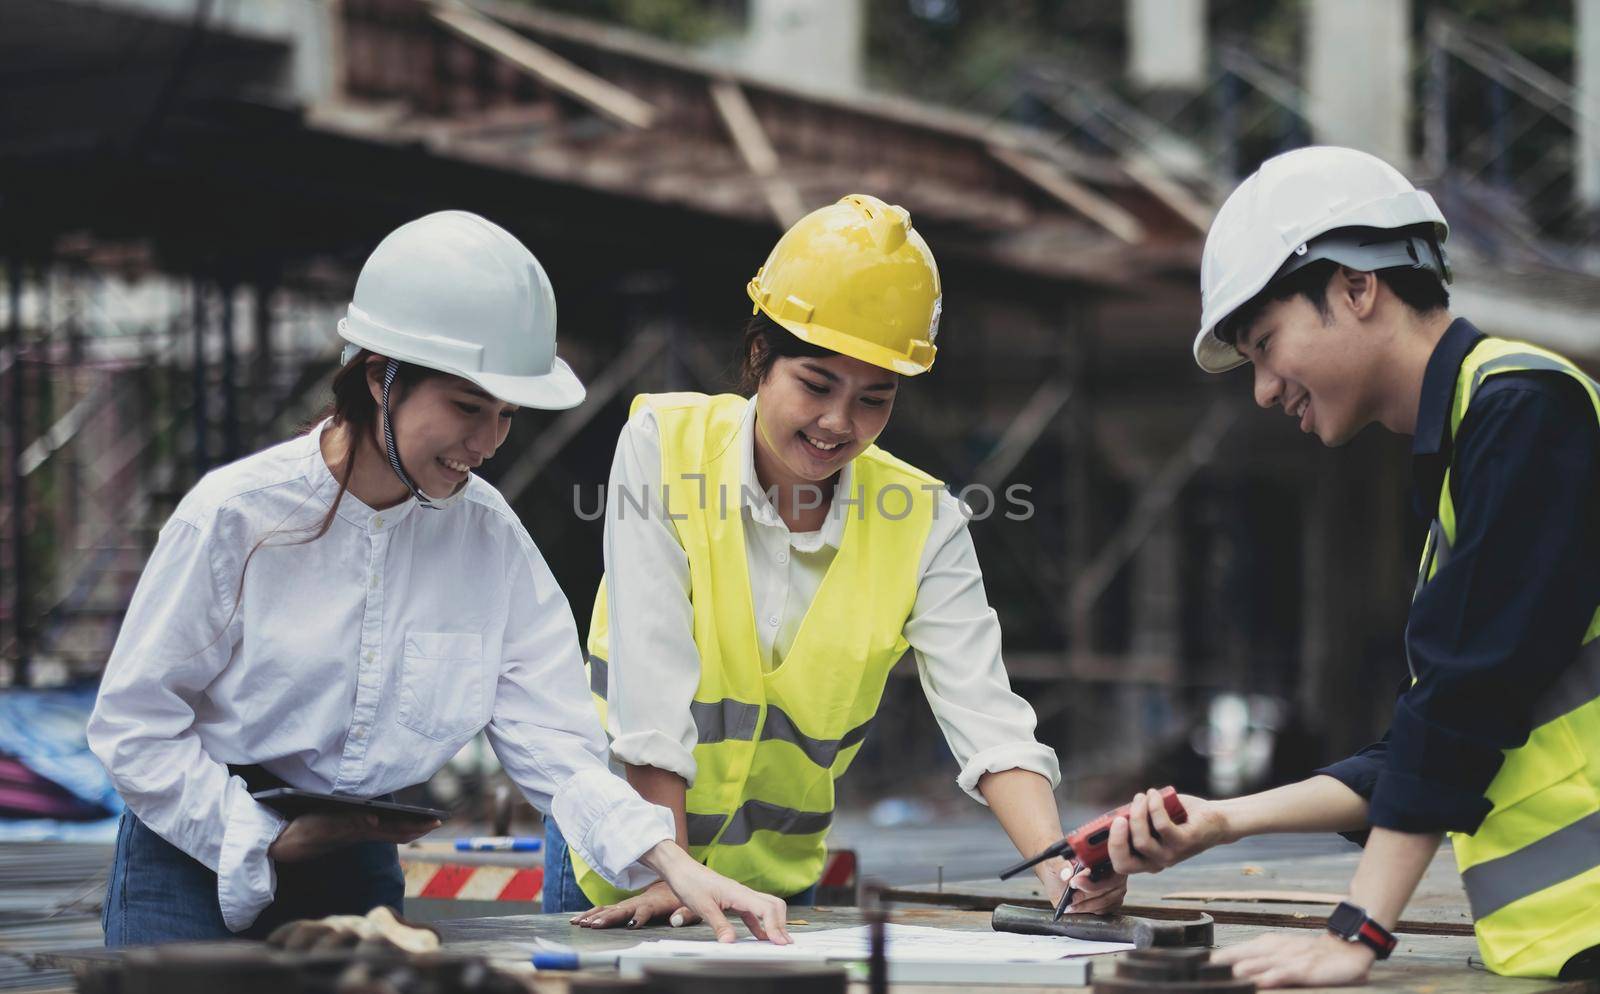 Three experts inspect commercial building construction sites, industrial buildings real estate projects with civil engineers, investors use laptops in background home, concrete formwork framing..